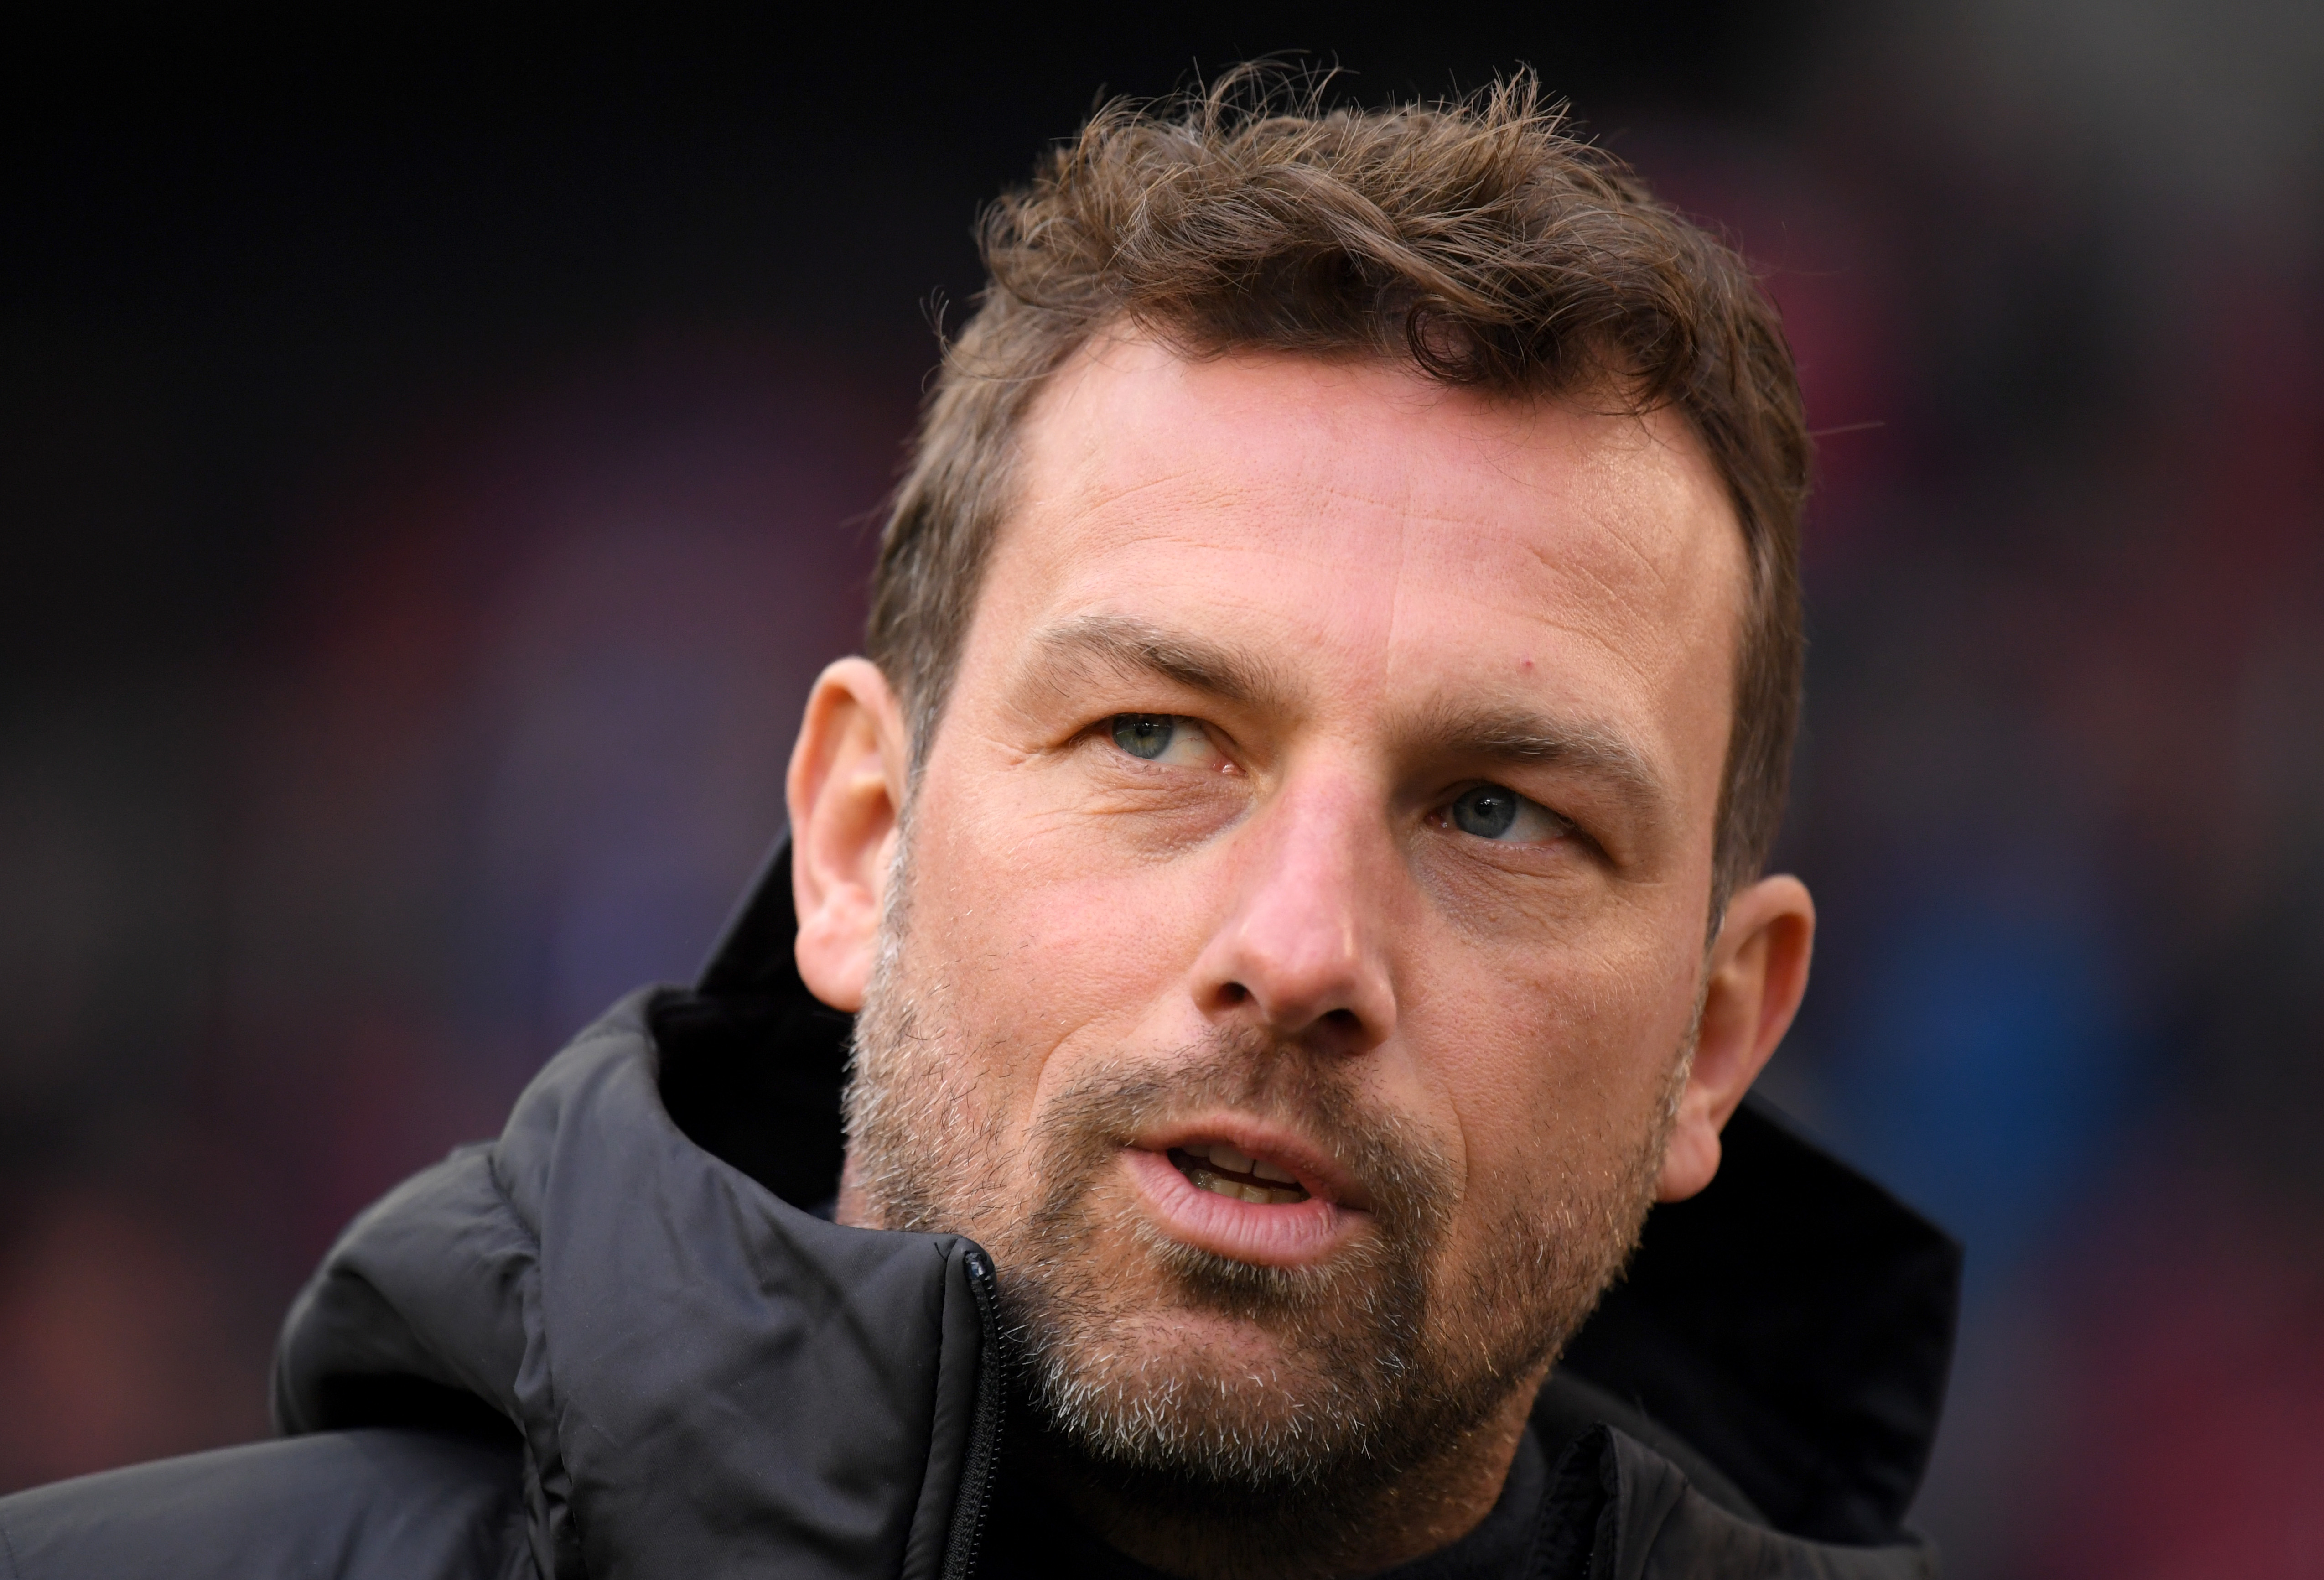 STUTTGART, GERMANY - JANUARY 19:  Markus Weinzierl, Manager of VfB Stuttgart looks on prior to the Bundesliga match between VfB Stuttgart and 1. FSV Mainz 05 at Mercedes-Benz Arena on January 19, 2019 in Stuttgart, Germany.  (Photo by Matthias Hangst/Bongarts/Getty Images)